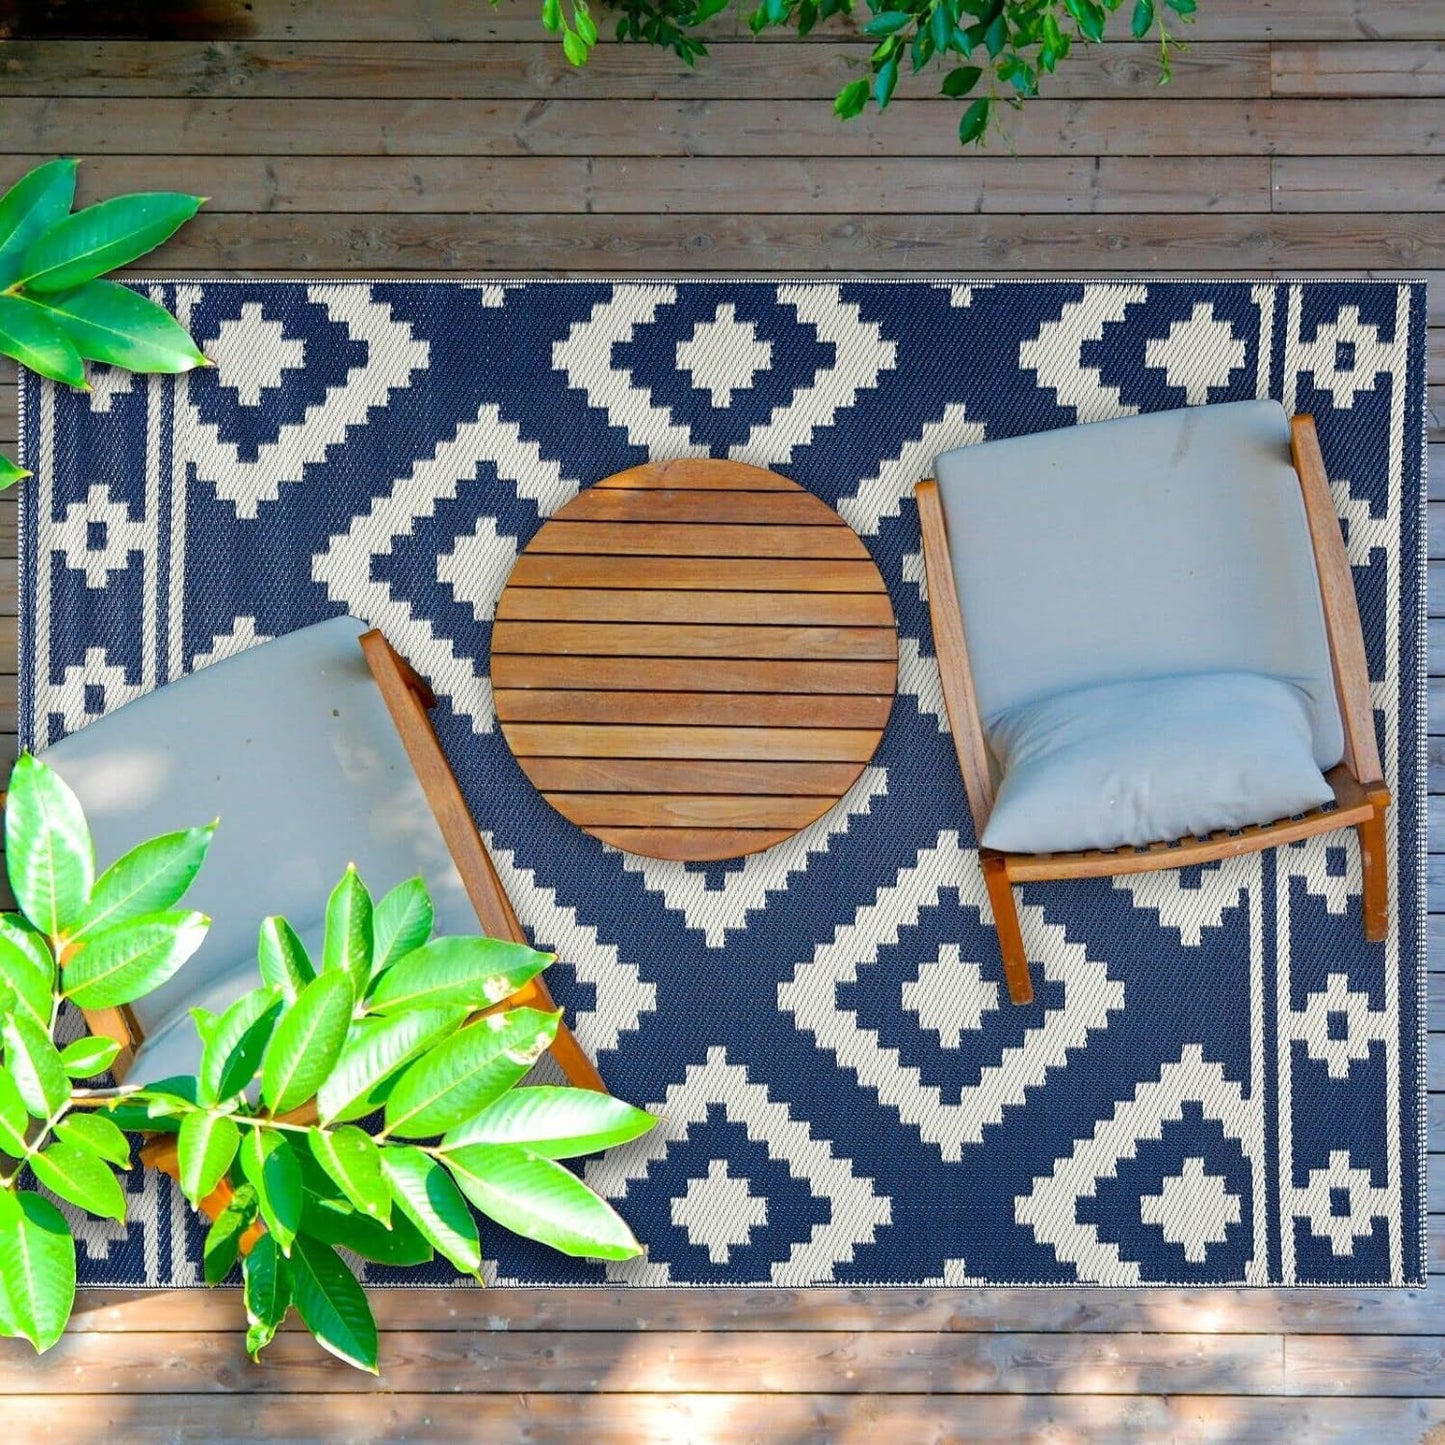 Playa Outdoor Rug - Crease-Free Recycled Plastic Floor Mat for Patio, Camping, Beach, Balcony, Porch, Deck - Weather, Water, Stain, Lightweight, Fade and UV Resistant - Milan- Navy & Creme